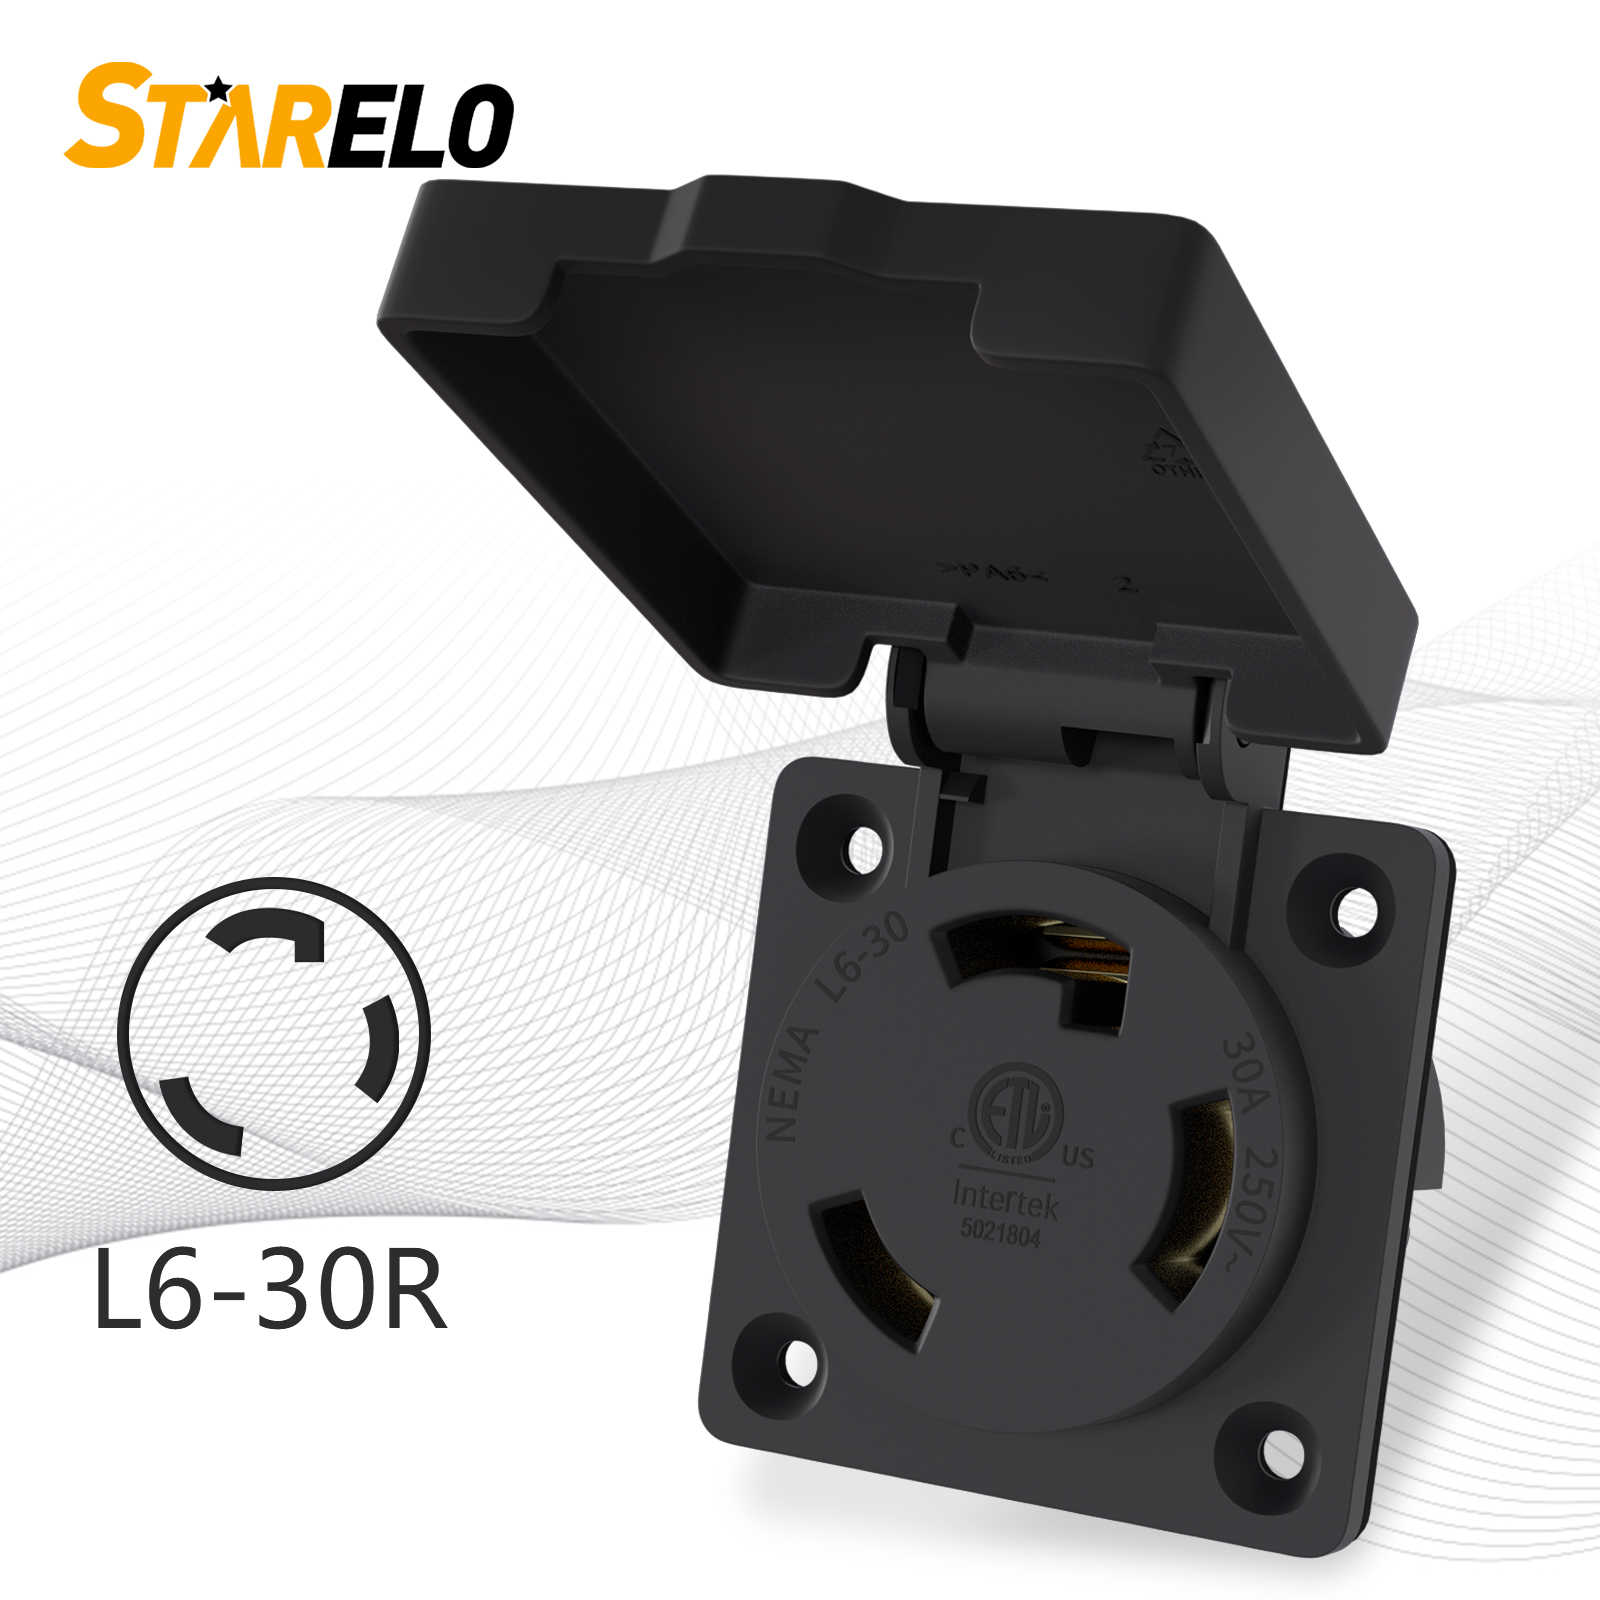 NEMA L6-30R 30Amp locking receptacle outlet with cover front view